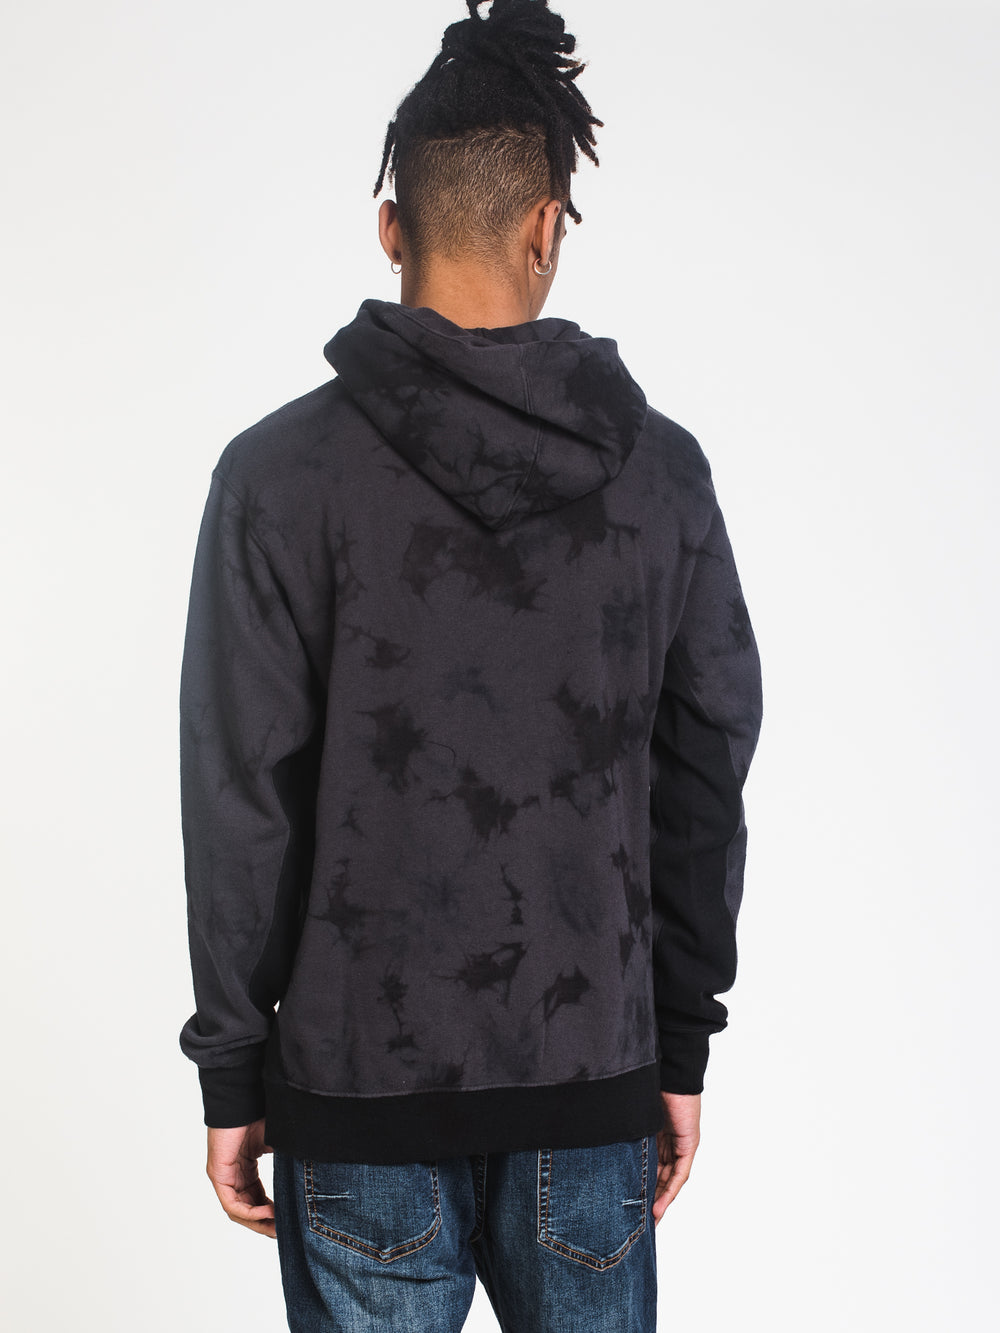 MENS WAVE WASHED PULLOVER HOODIE - BLACK - CLEARANCE